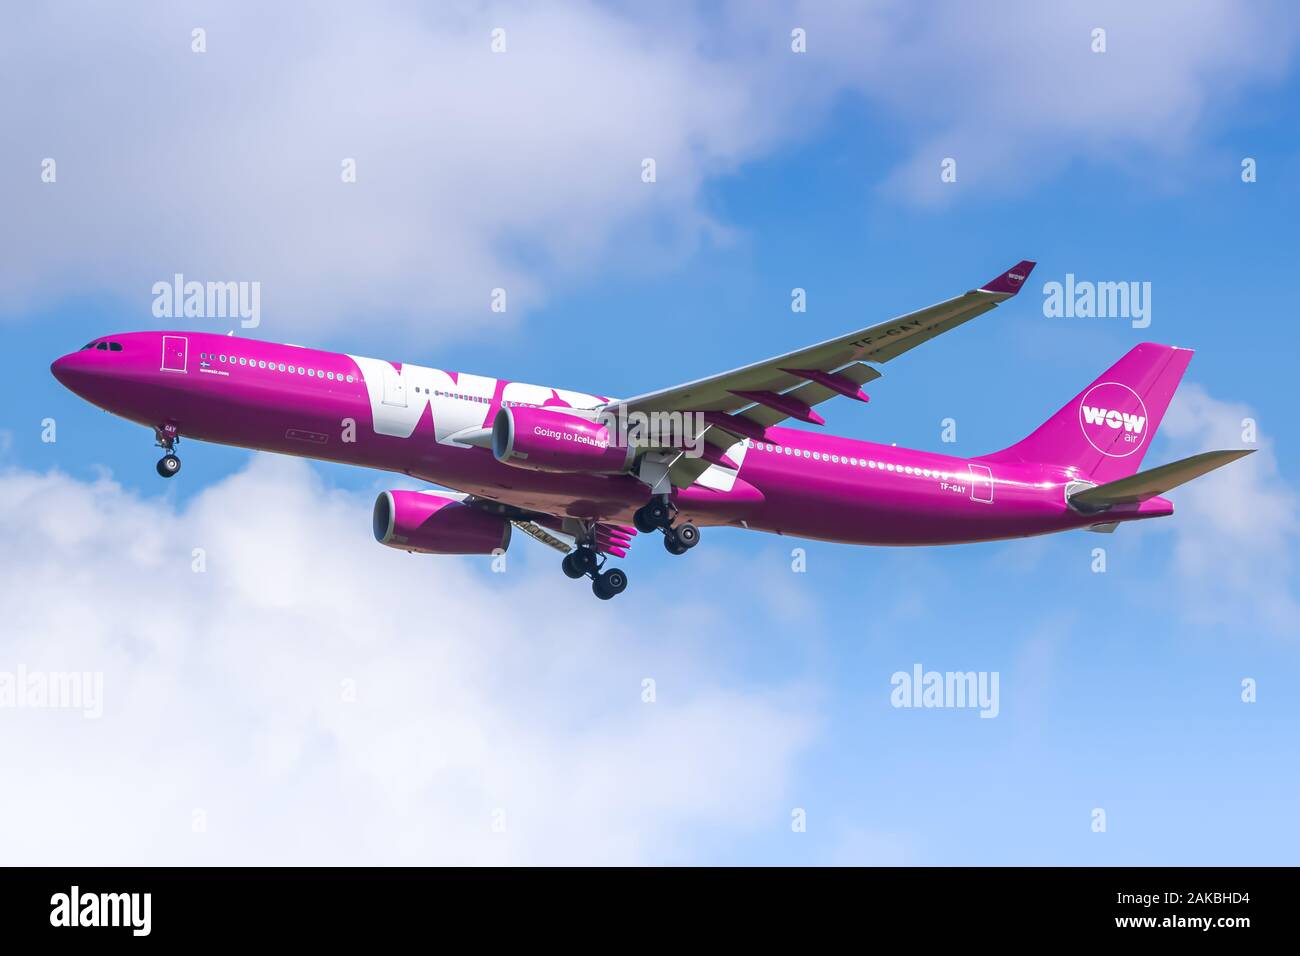 Paris, France - August 17, 2018: Wow Air Airbus A330 airplane at Paris Charles de Gaulle airport (CDG) in France. Airbus is an aircraft manufacturer f Stock Photo